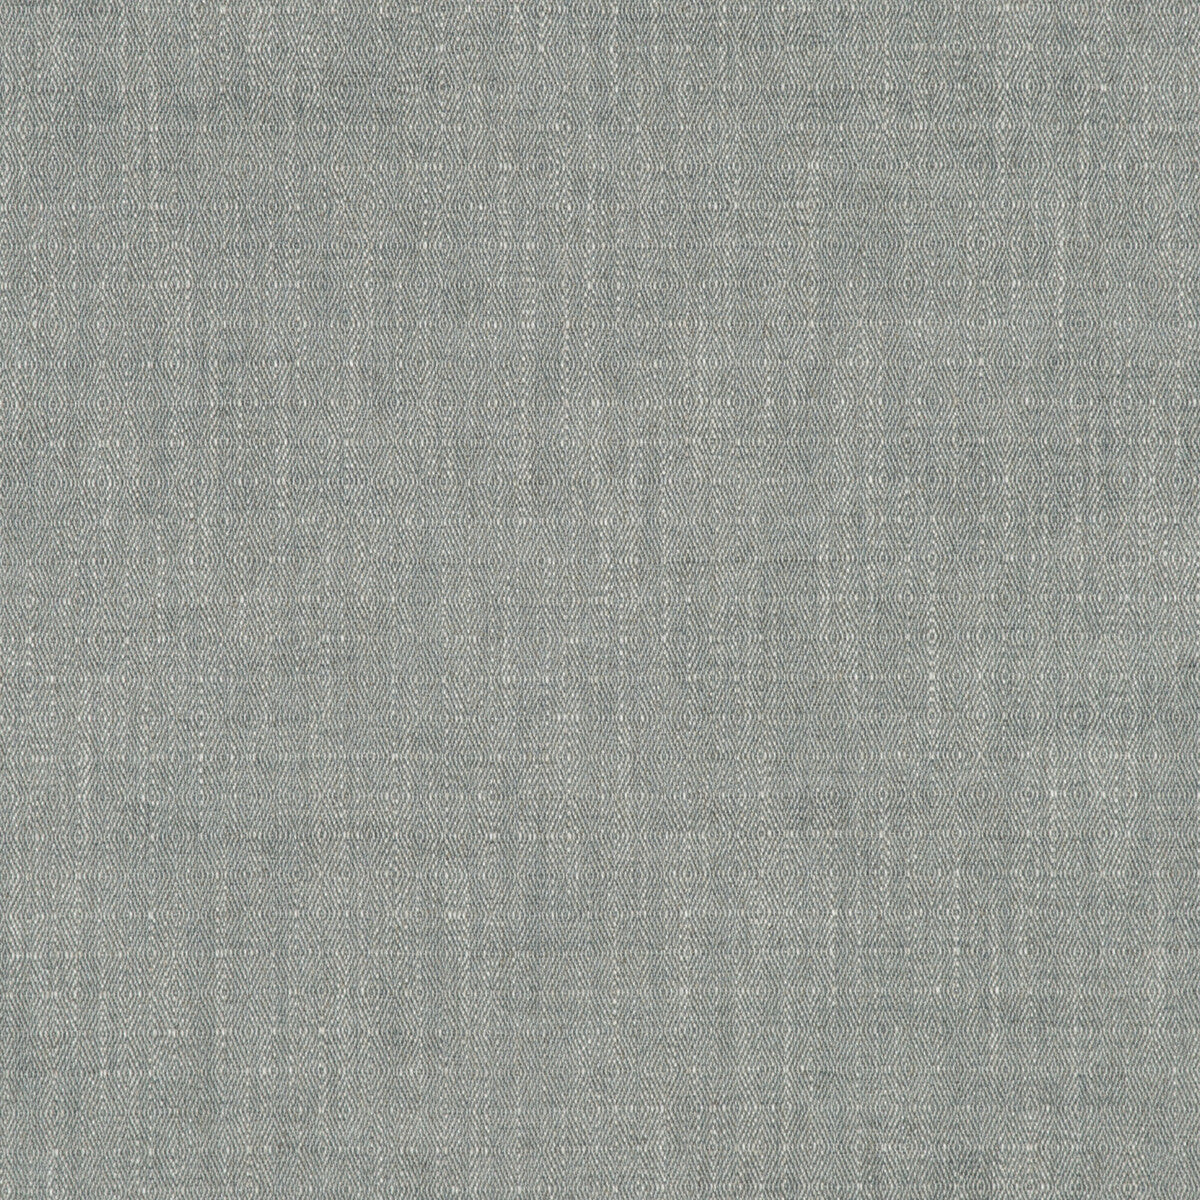 Hayle fabric in teal color - pattern BF10570.615.0 - by G P &amp; J Baker in the Artisan collection